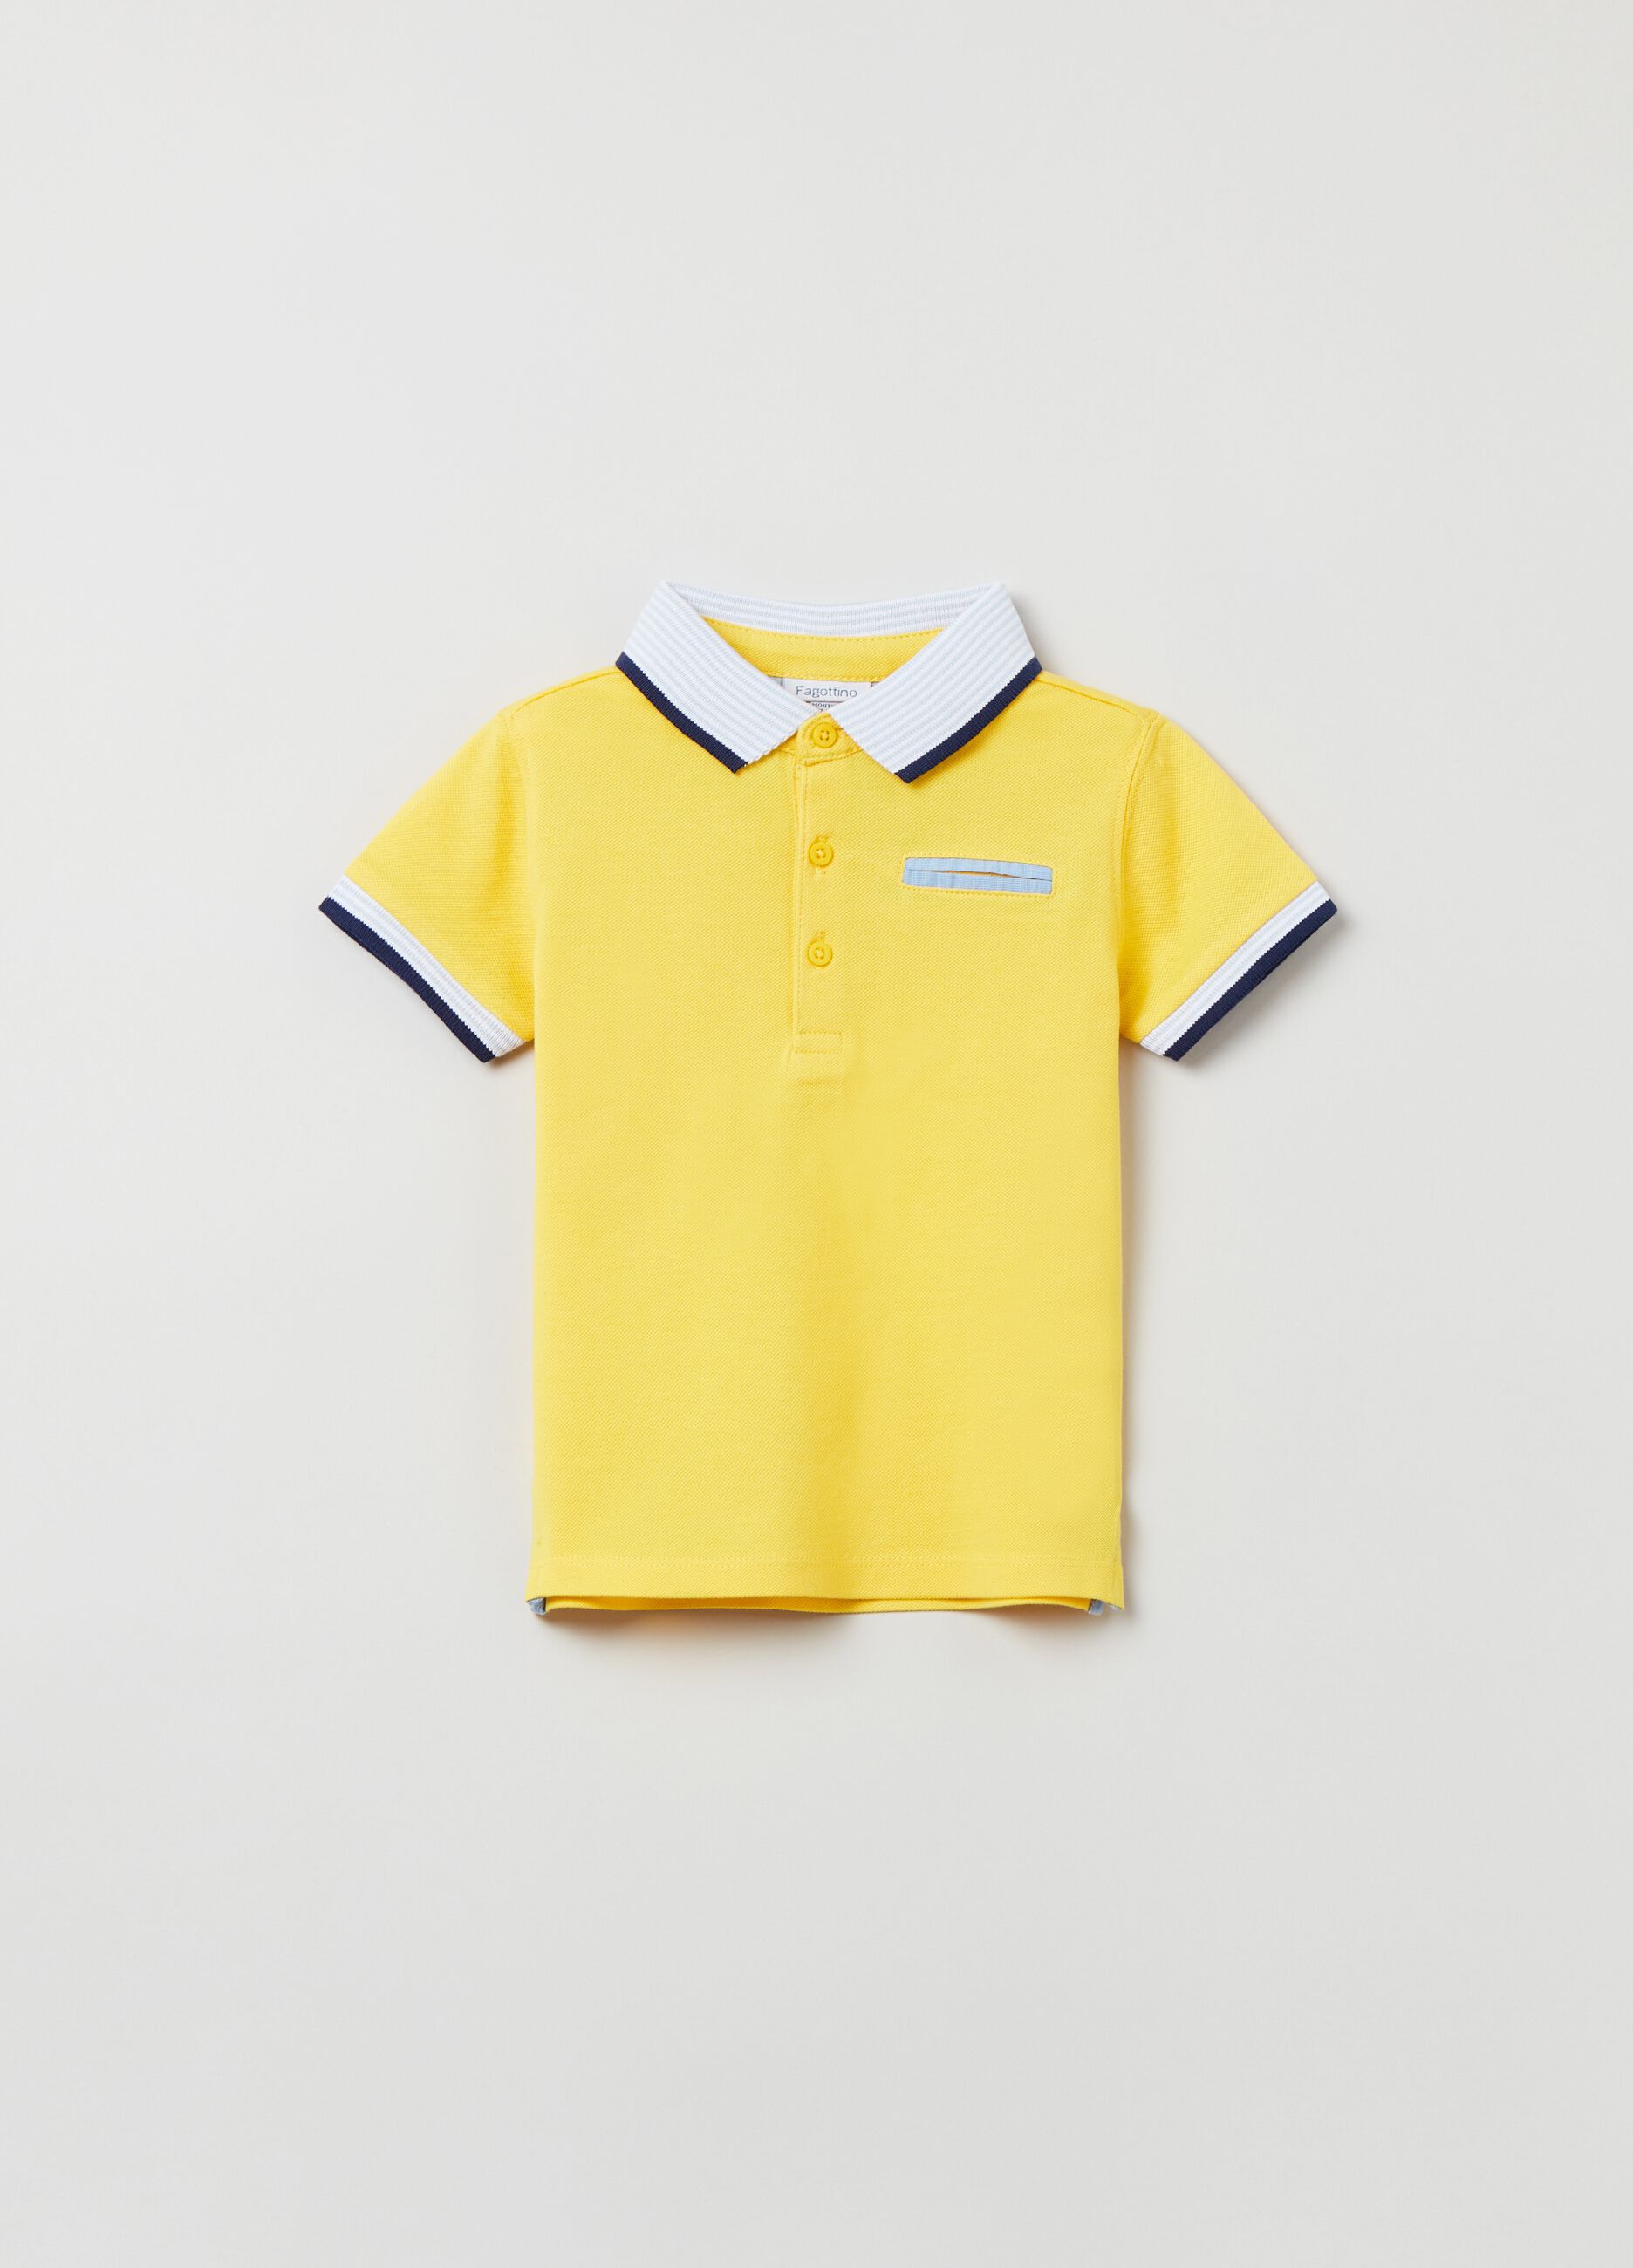 Polo shirt with small pocket and contrasting edging.